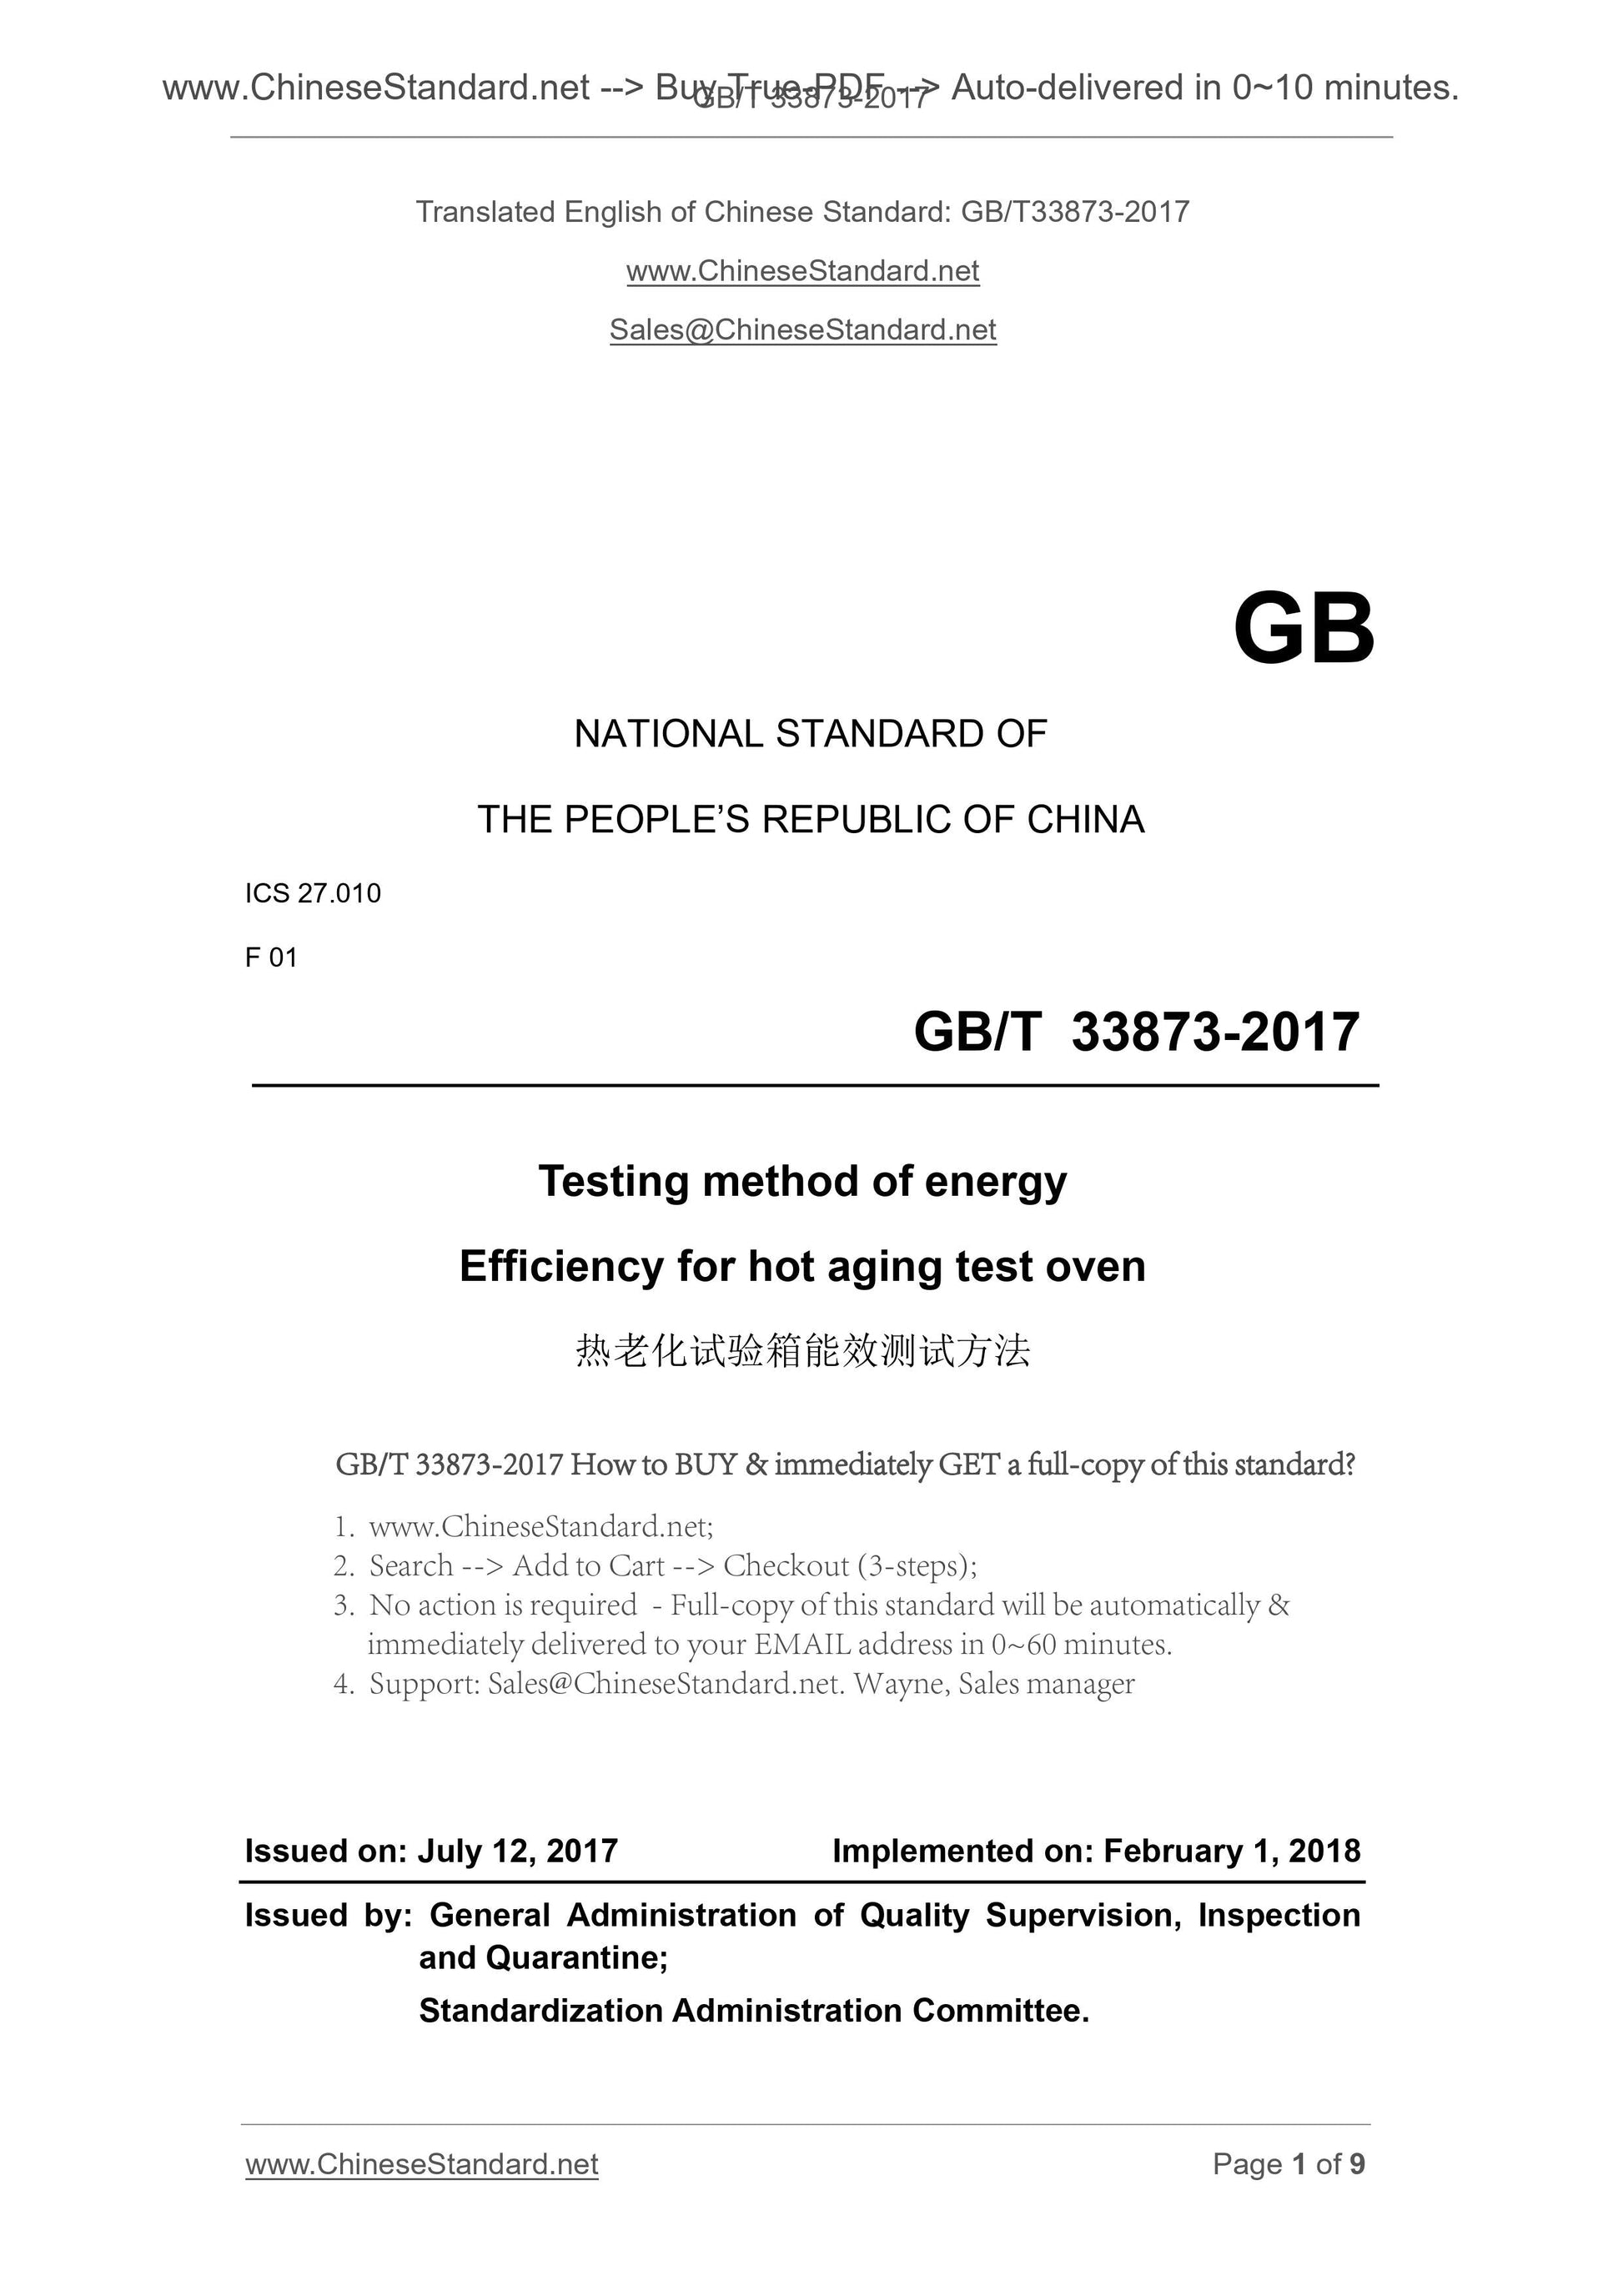 GB/T 33873-2017 Page 1